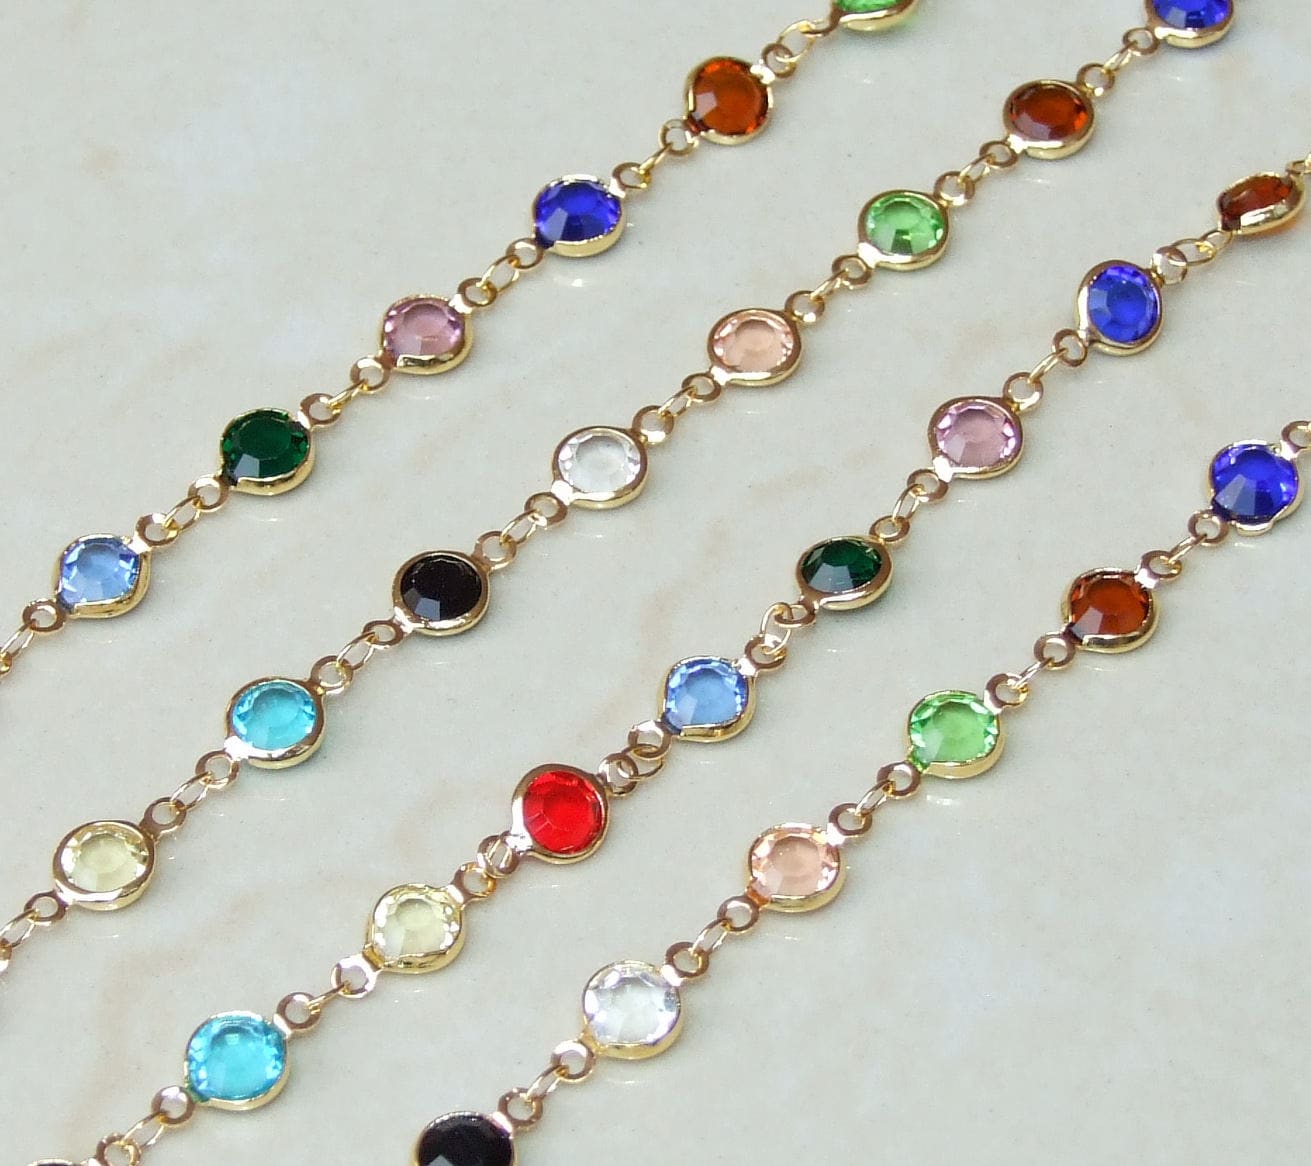 Multicolored Glass Rosary Chain, Bulk Chain, Faceted Glass Beads, Beaded Chain, Body Chain Jewelry, Gold Chain, Necklace Chain, Belly Chain